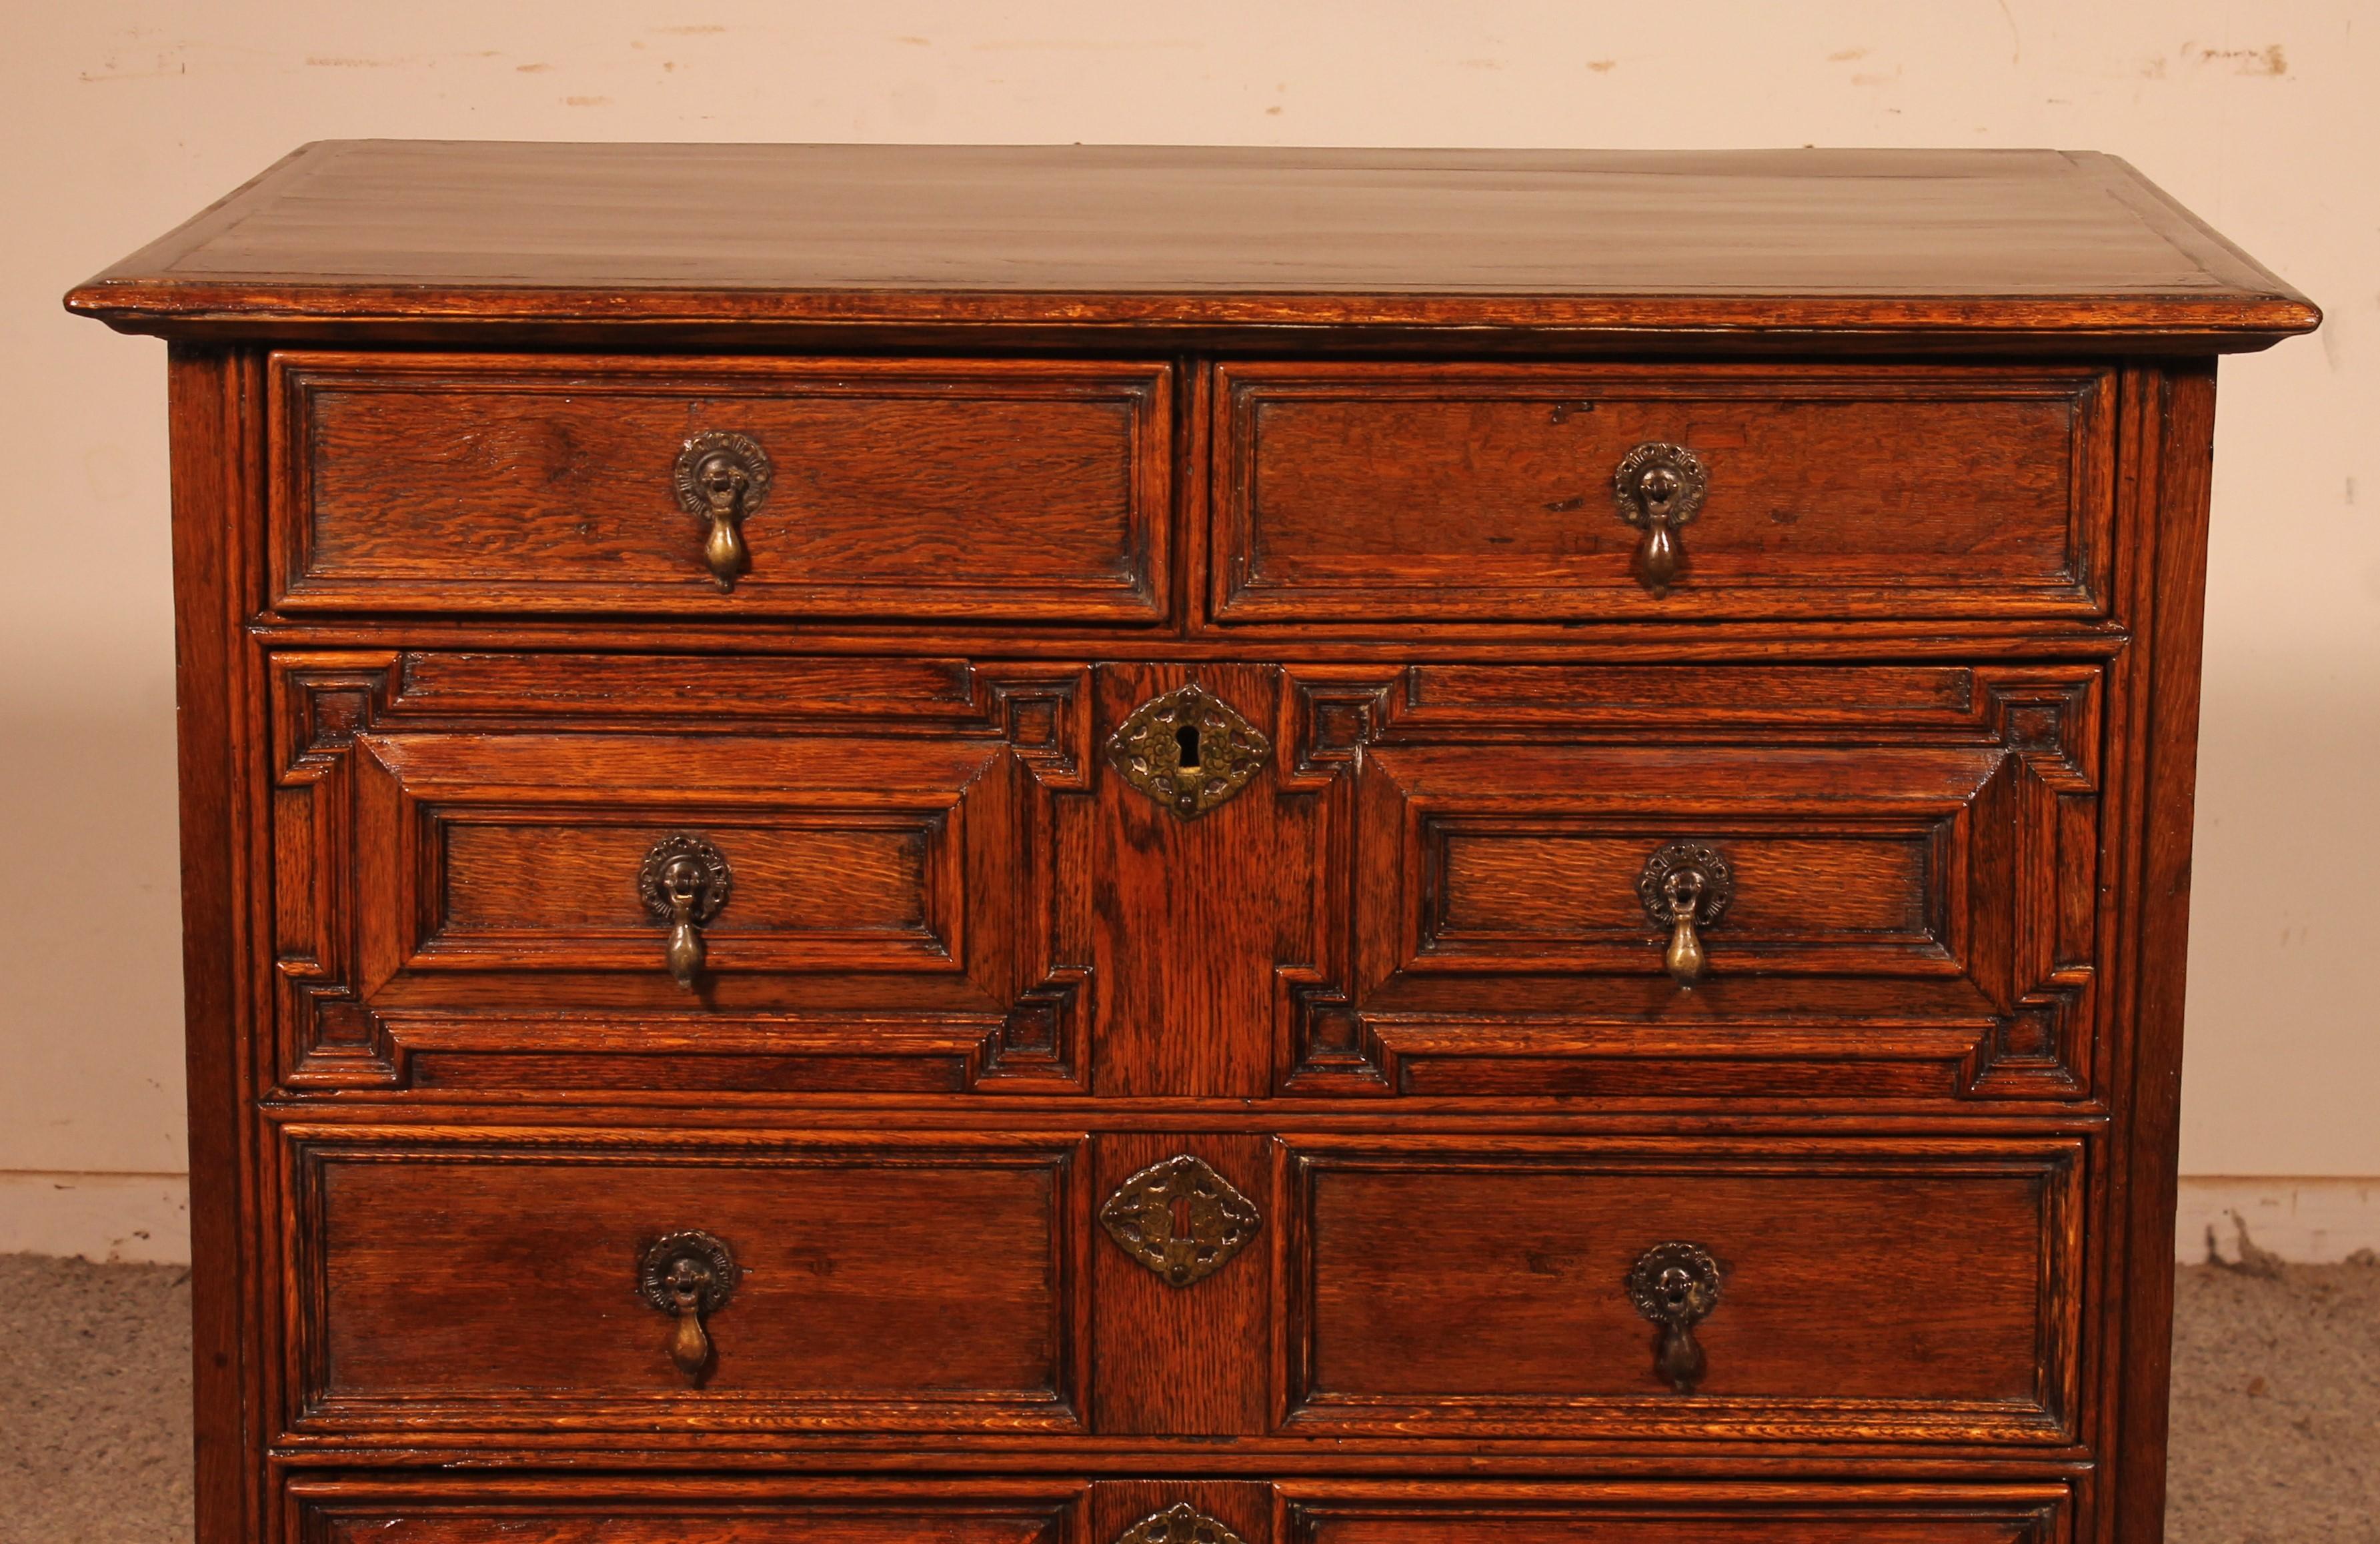 British Superb and Rare Jacobean Chest of Drawers from the 17th Century from England Sma